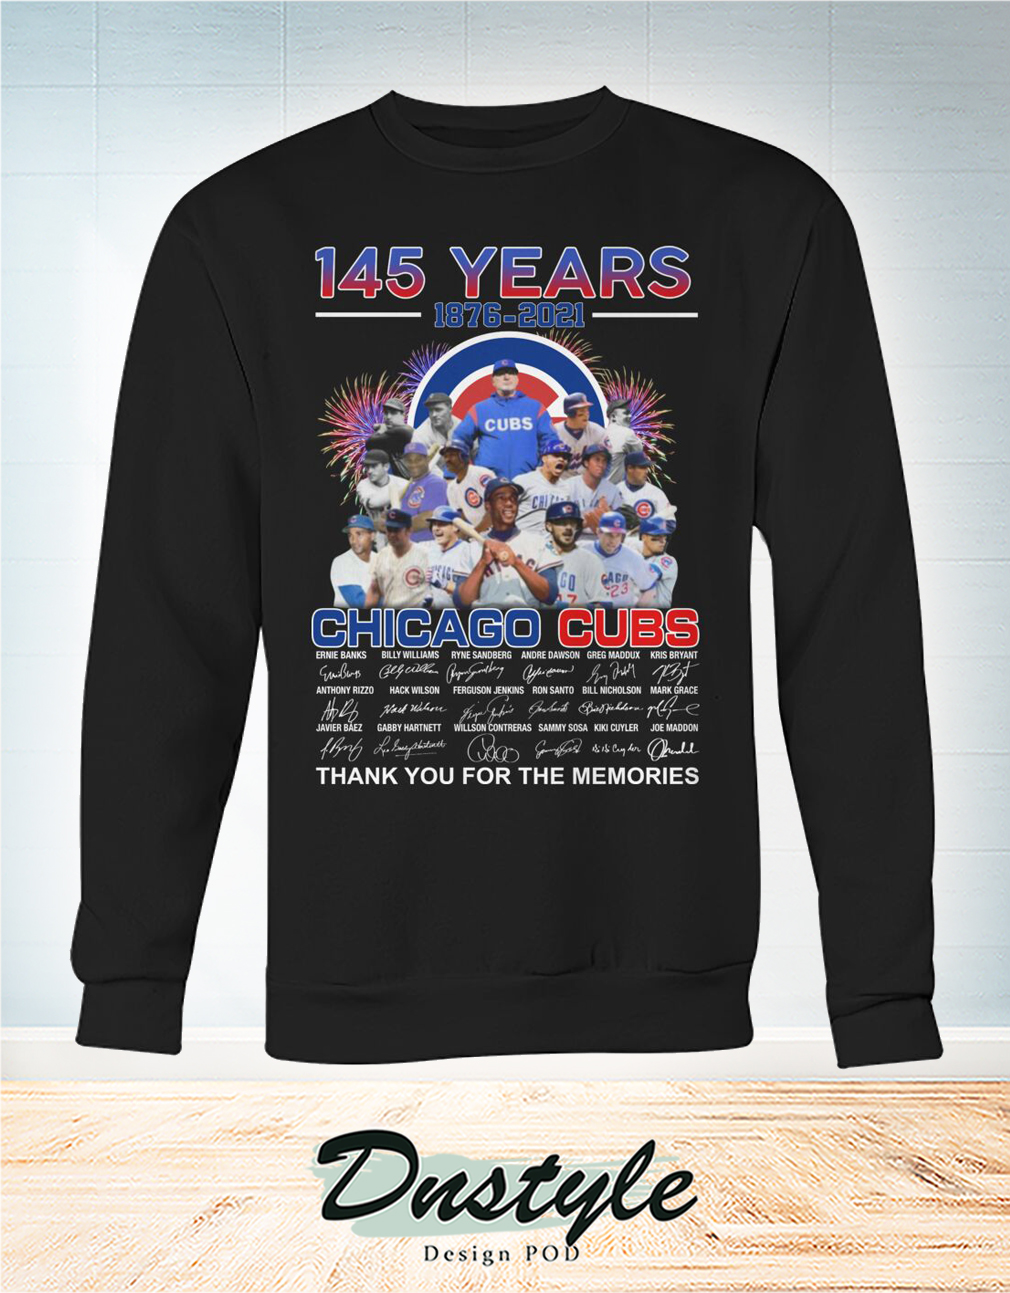 Chicago cubs 145 years signature thank you for the memories sweatshirt